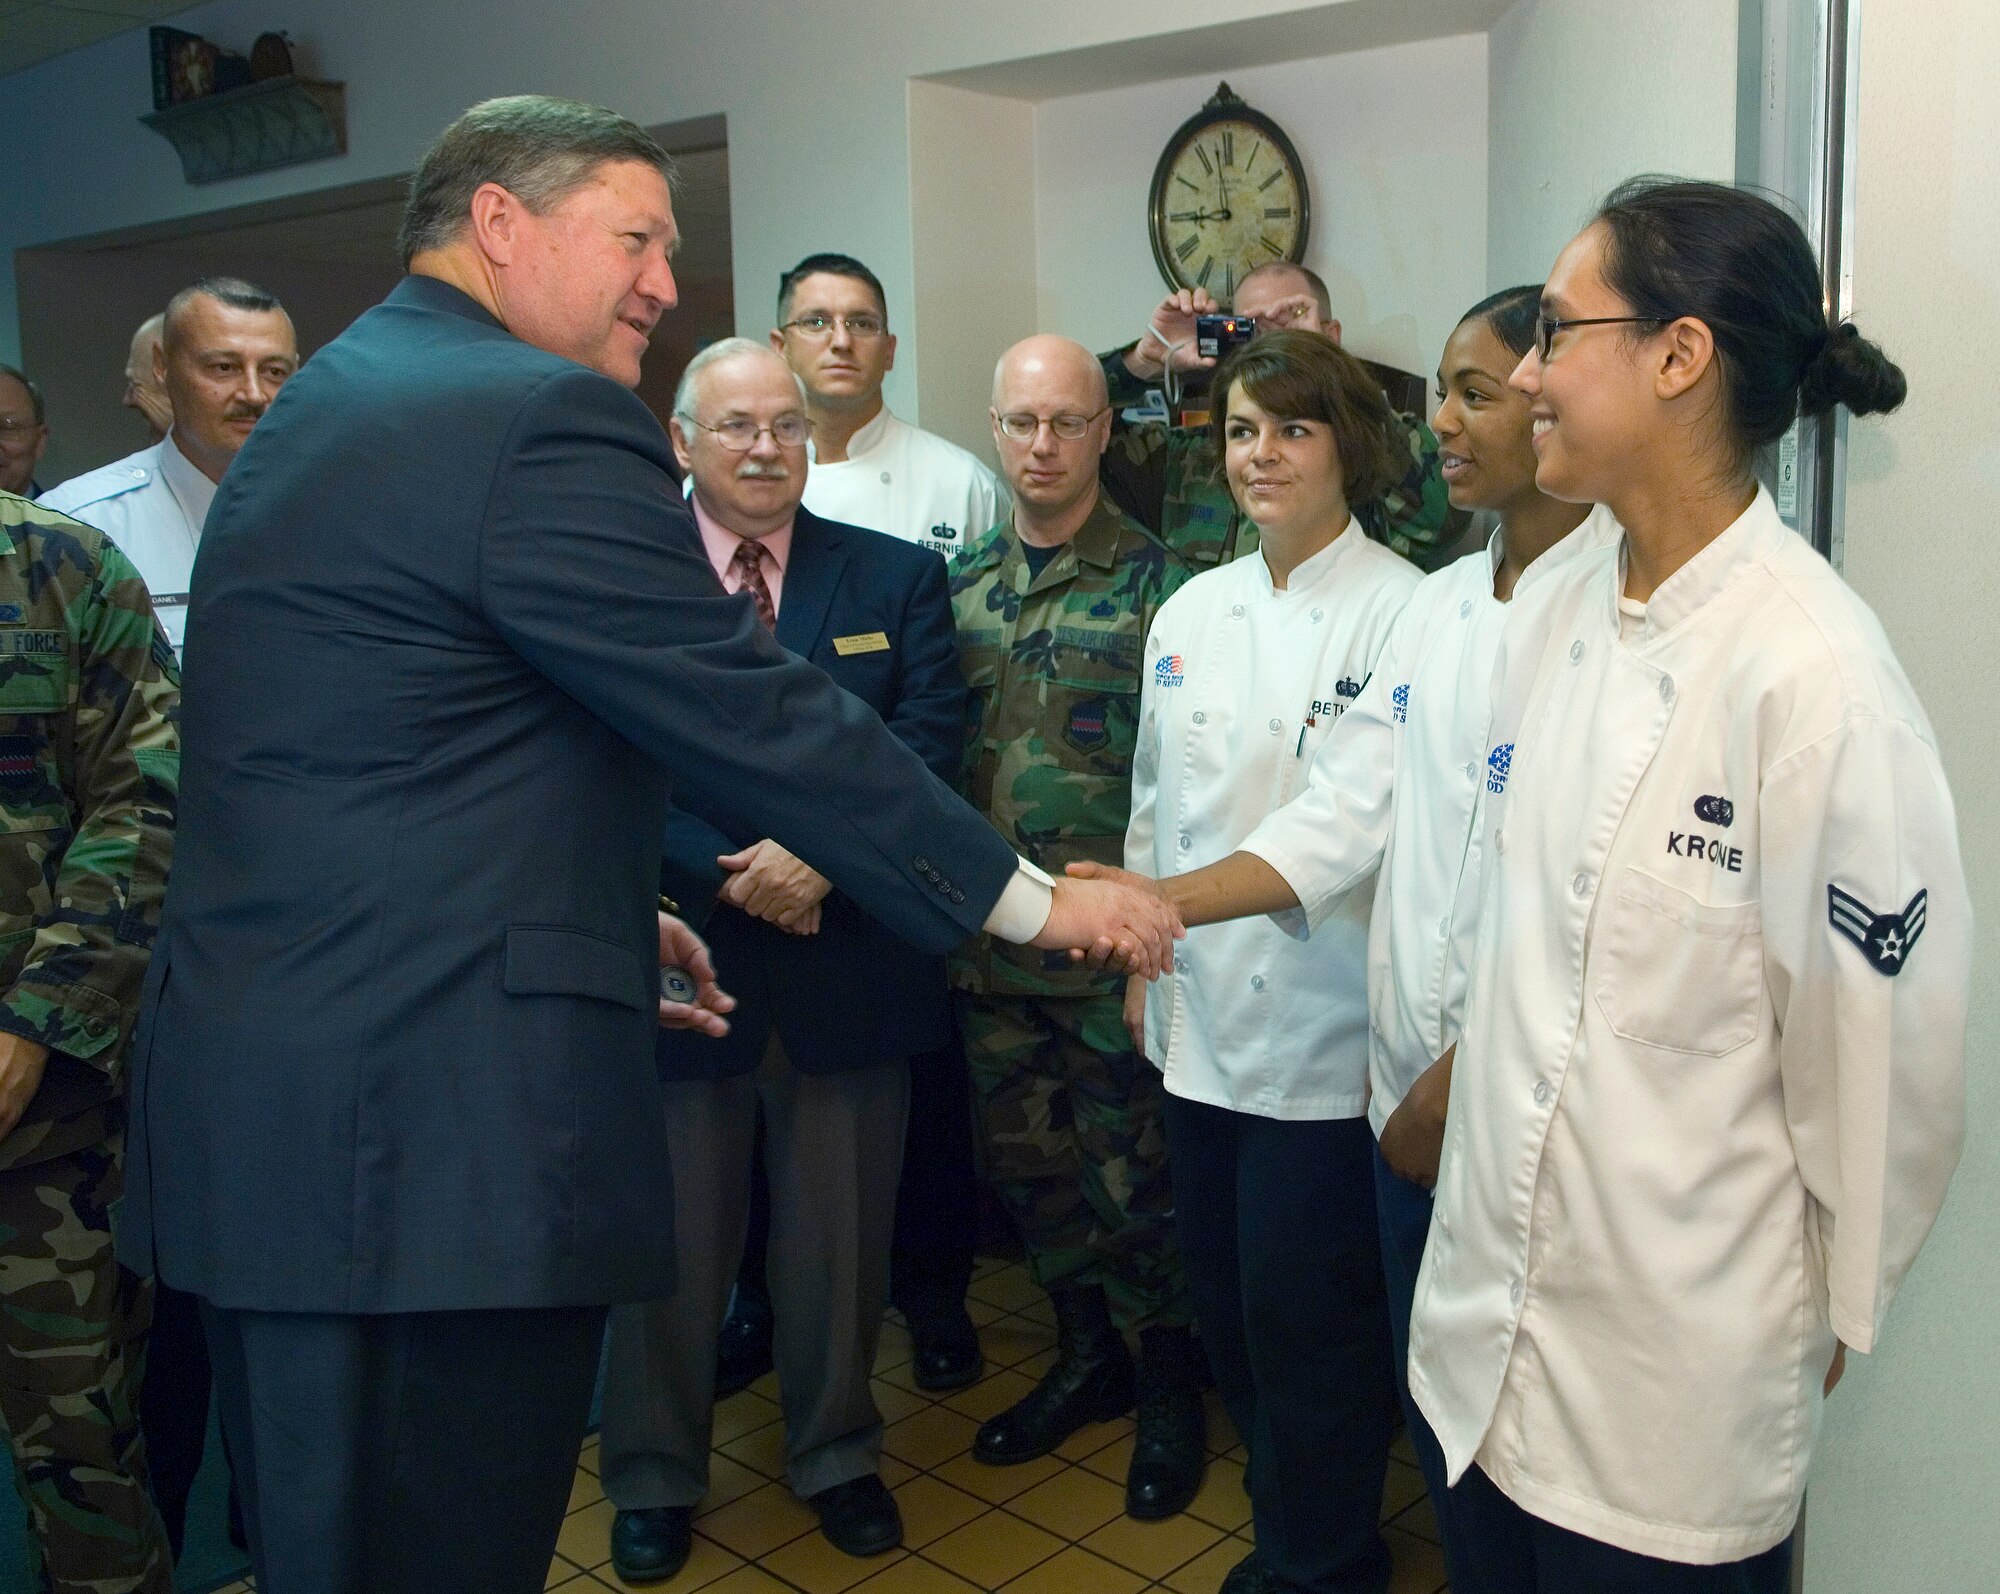 Acting Secretary of the Air Force Michael B. Donley presents Senior Airman Brandy Griffith and fellow members of the 55th Force Support Squadron with a coin for excellence in preparing a senior leadership breakfast Aug. 11 at the Ronald L. King Dining Facility at Offutt Air Force Base, Neb. (U.S. Air Force photo/Staff Sgt. Bennie J. Davis III)